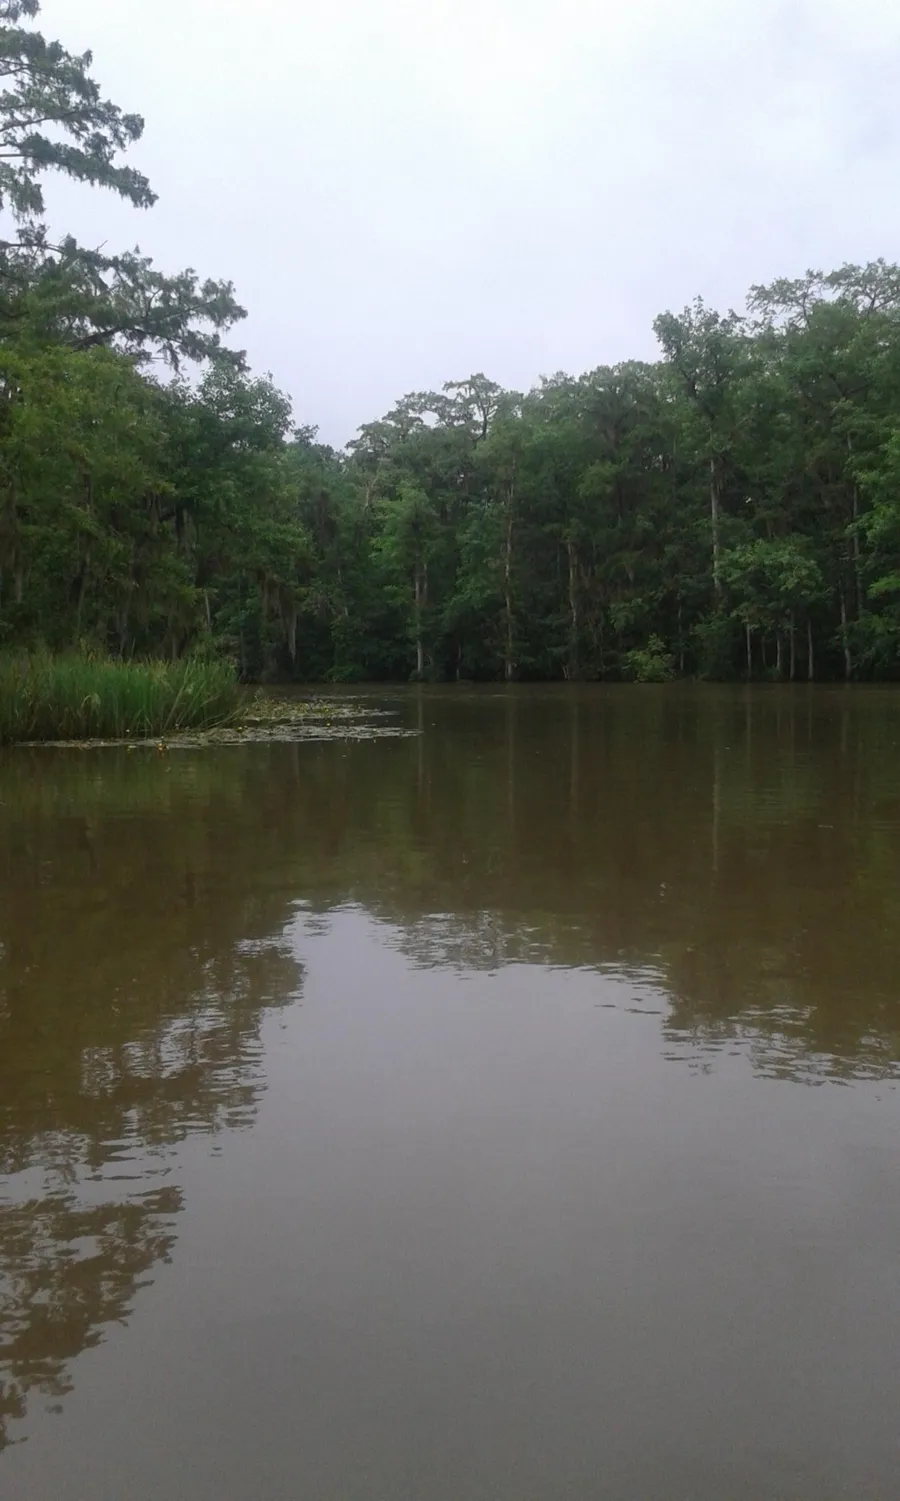 The image shows a calm body of water surrounded by a dense, green forest under an overcast sky.